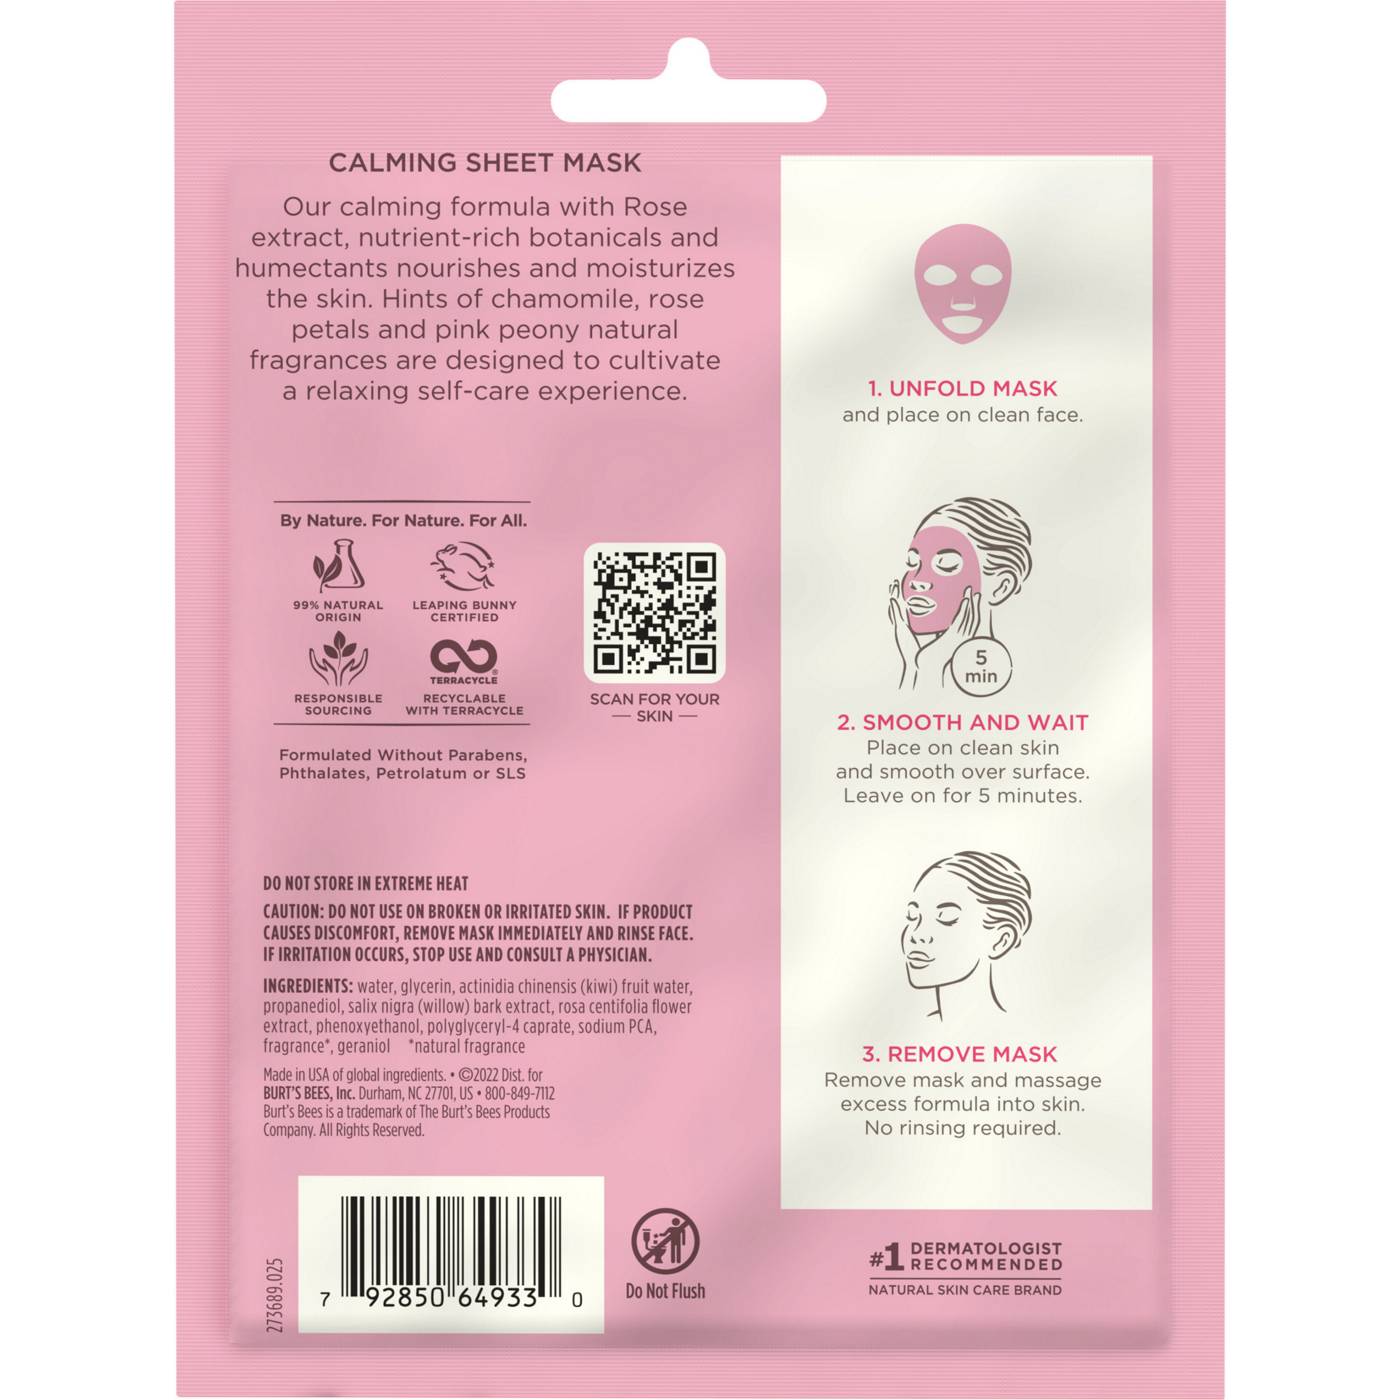 Burt's Bees Calming Sheet Mask with Rose; image 6 of 7